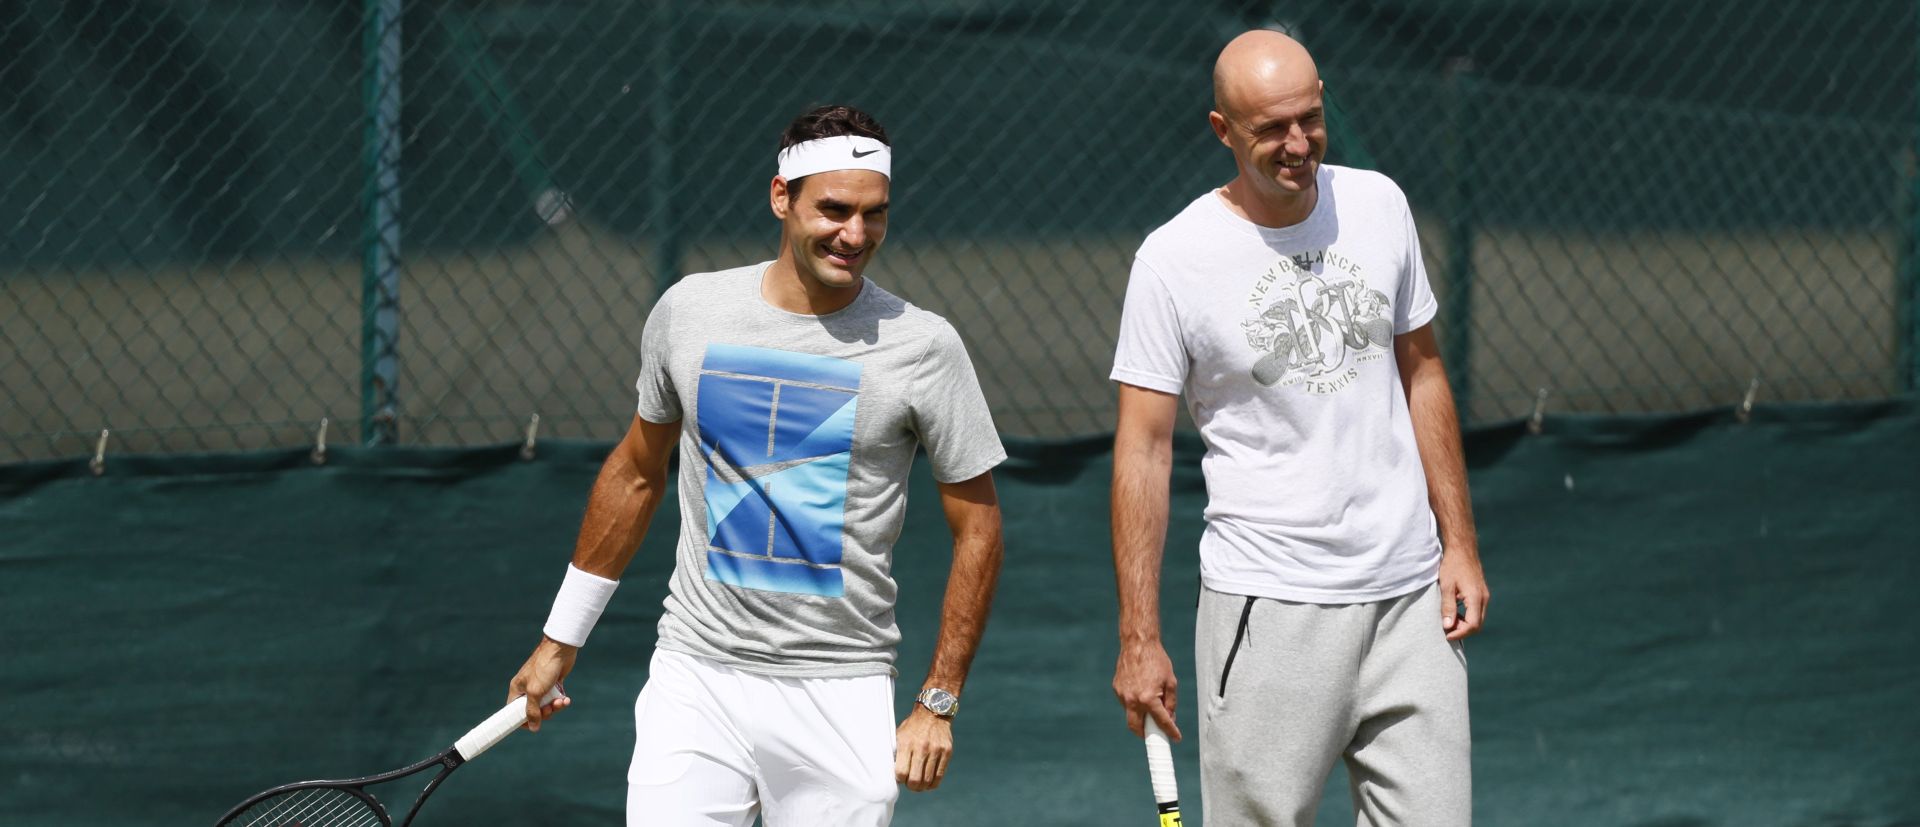 epa06059781 Roger Federer of Switzerland (L) with his coach Ivan Ljubicic during a training session prior to the Wimbledon Championships at the All England Lawn Tennis Club, in London, Britain, 01 July 2017  EPA/NIC BOTHMA EDITORIAL USE ONLY/NO COMMERCIAL SALES